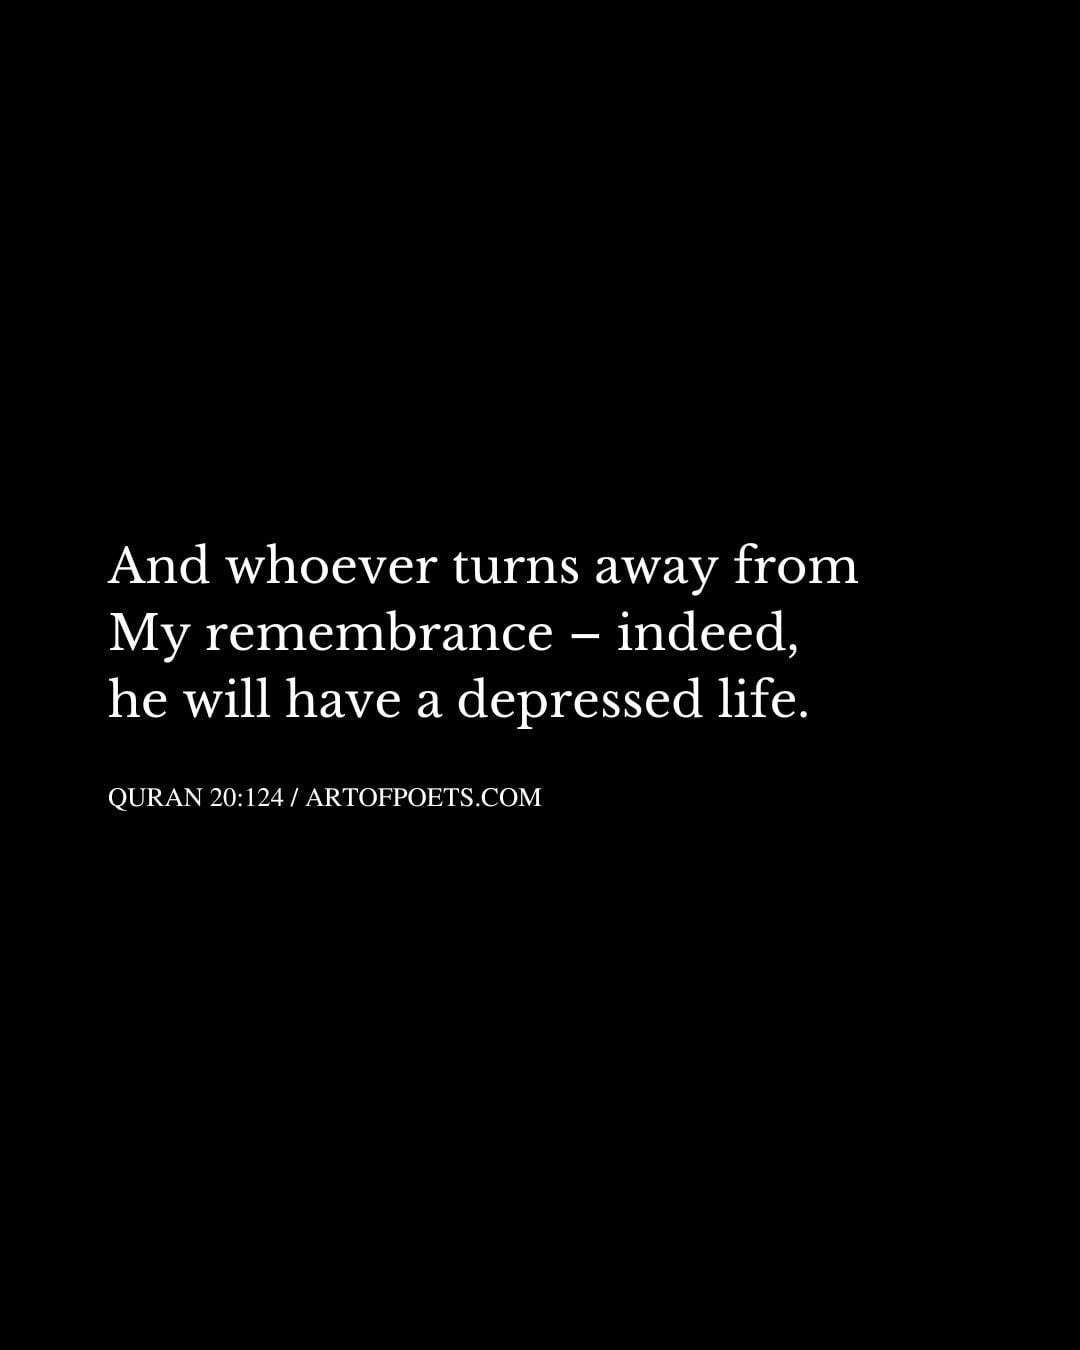 And whoever turns away from My remembrance – indeed he will have a depressed life